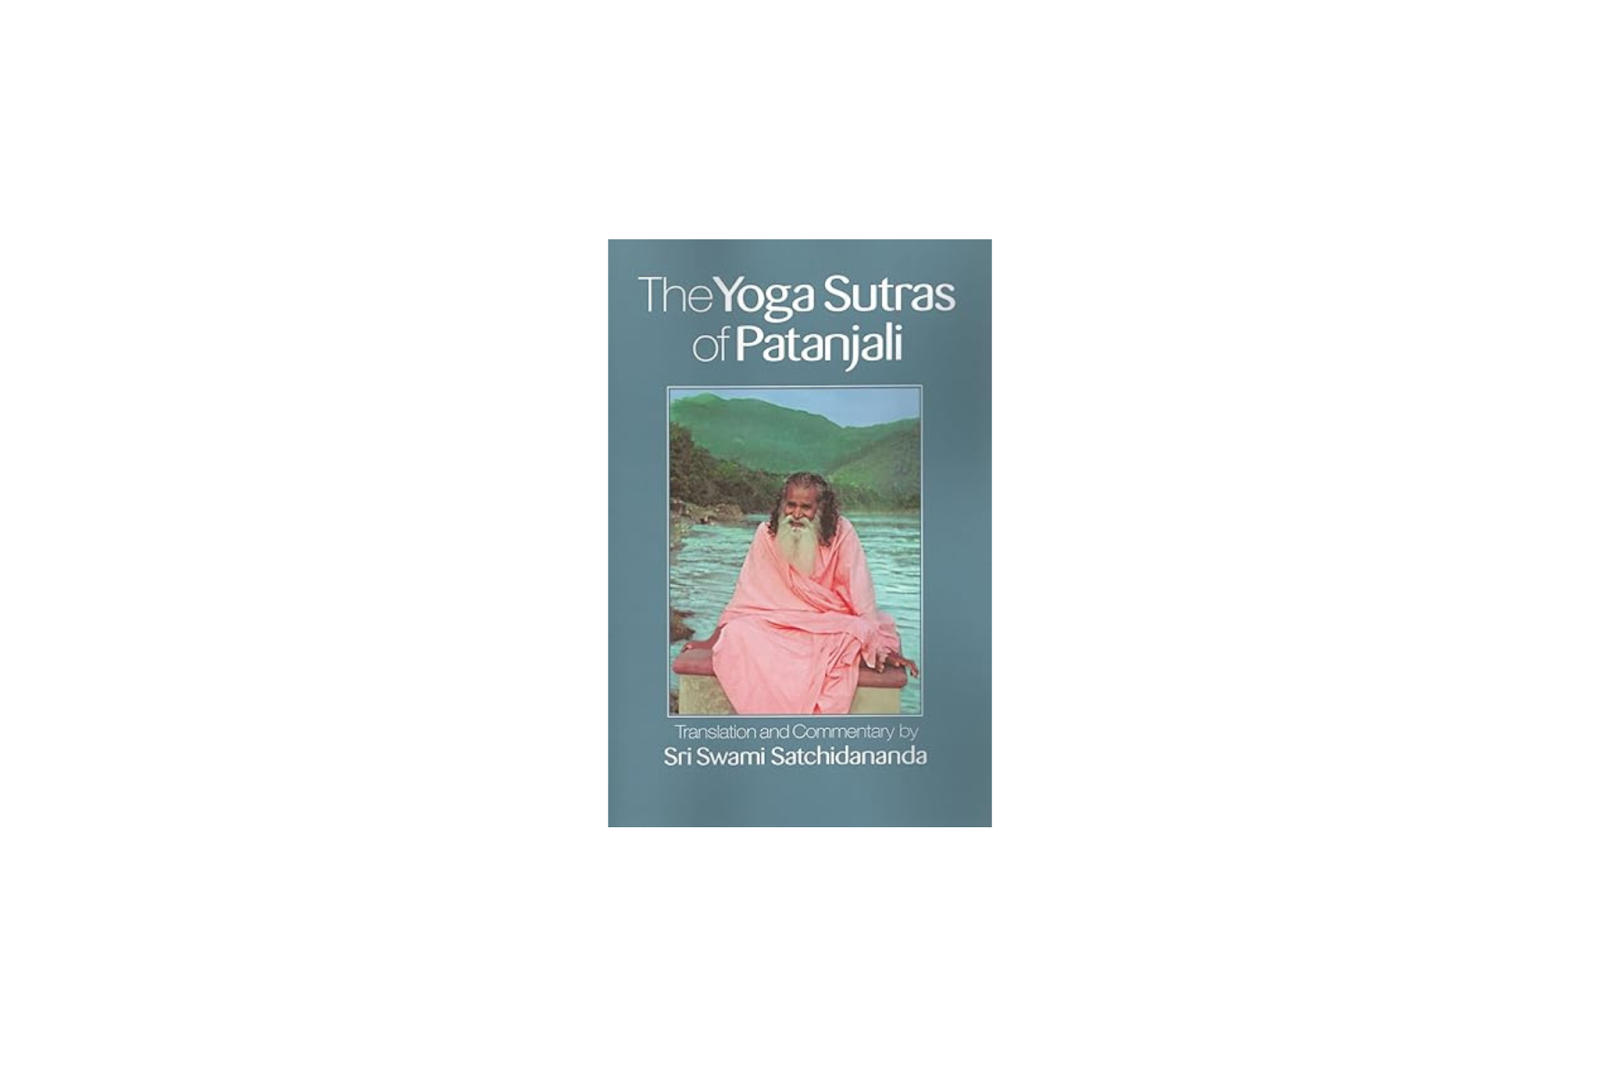 Yoga Sutras of Patanjali by Patanjali